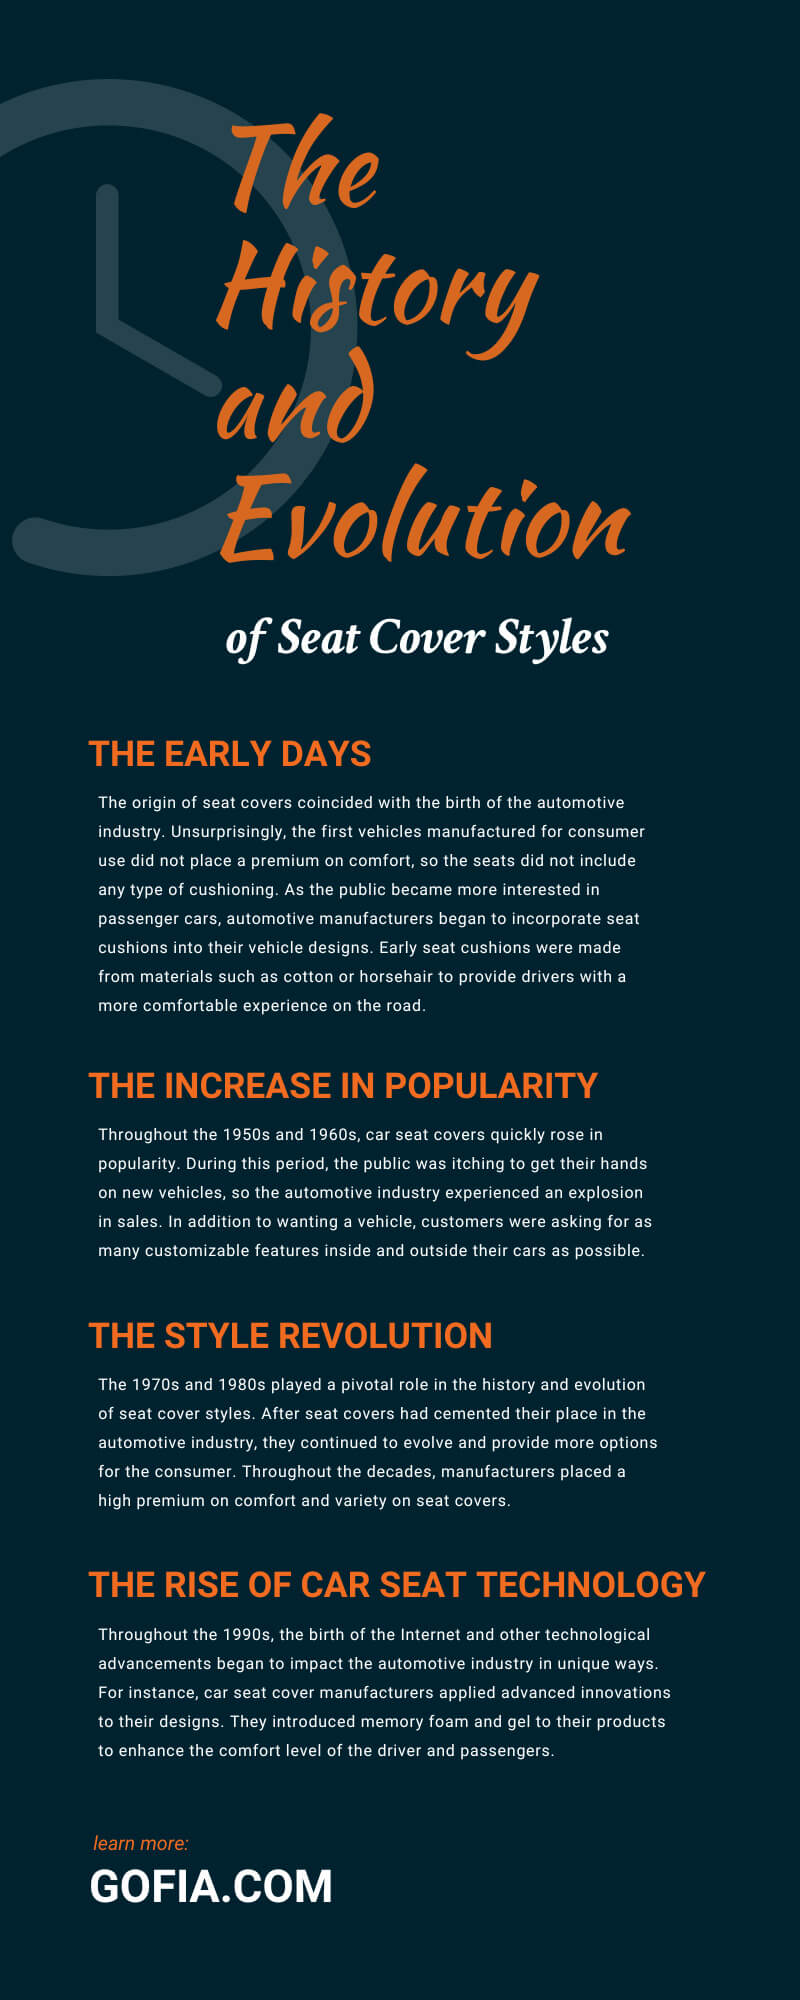 The History and Evolution of Seat Cover Styles